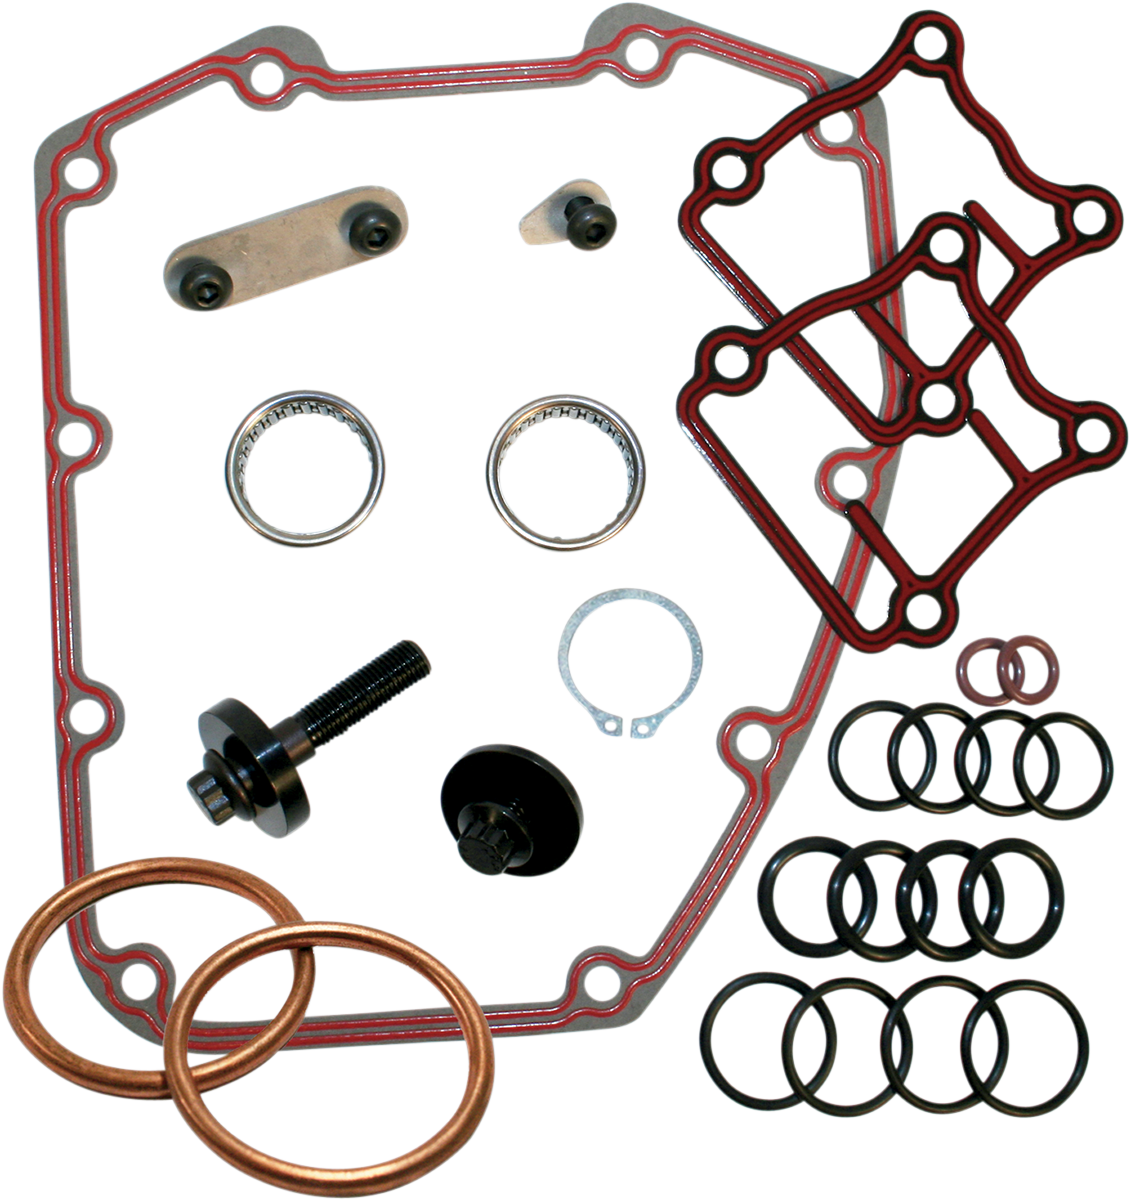 Feuling Gear Drive Camshaft Installation Kit 200-2017 Harley Softail Touring